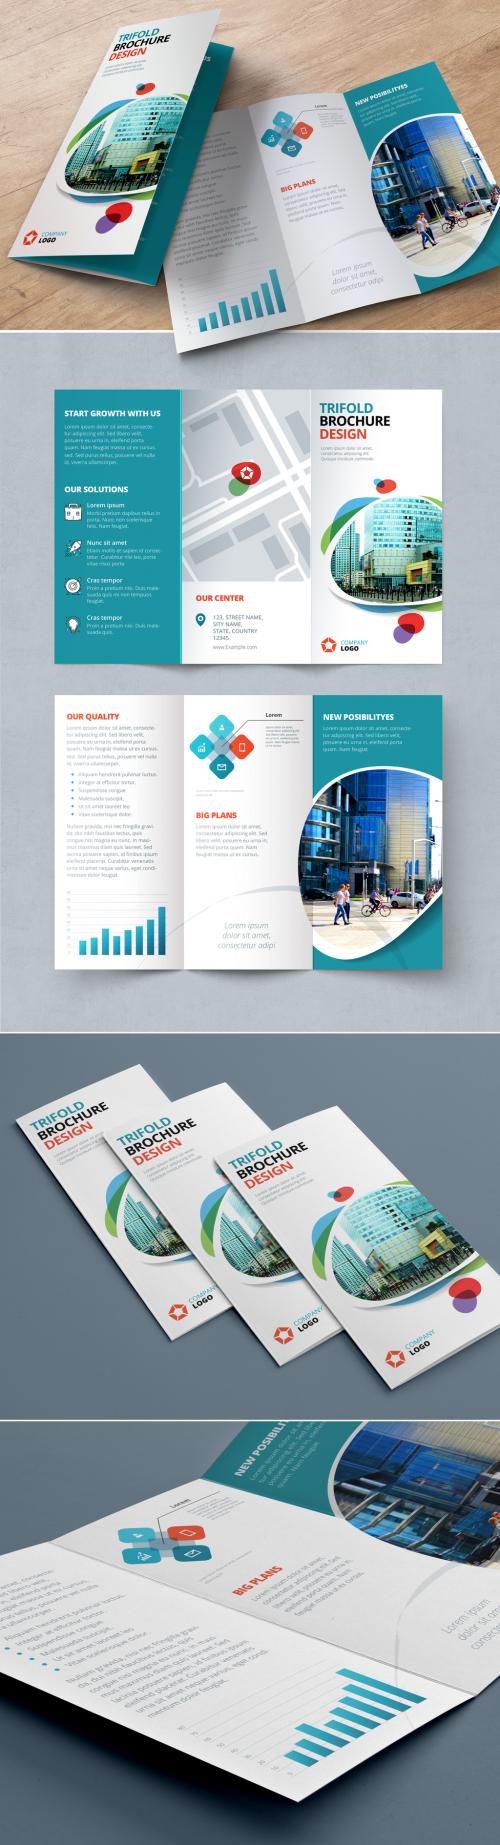 Adobe Stock - Blue Trifold Brochure Layout with Abstract Spots - 212820402